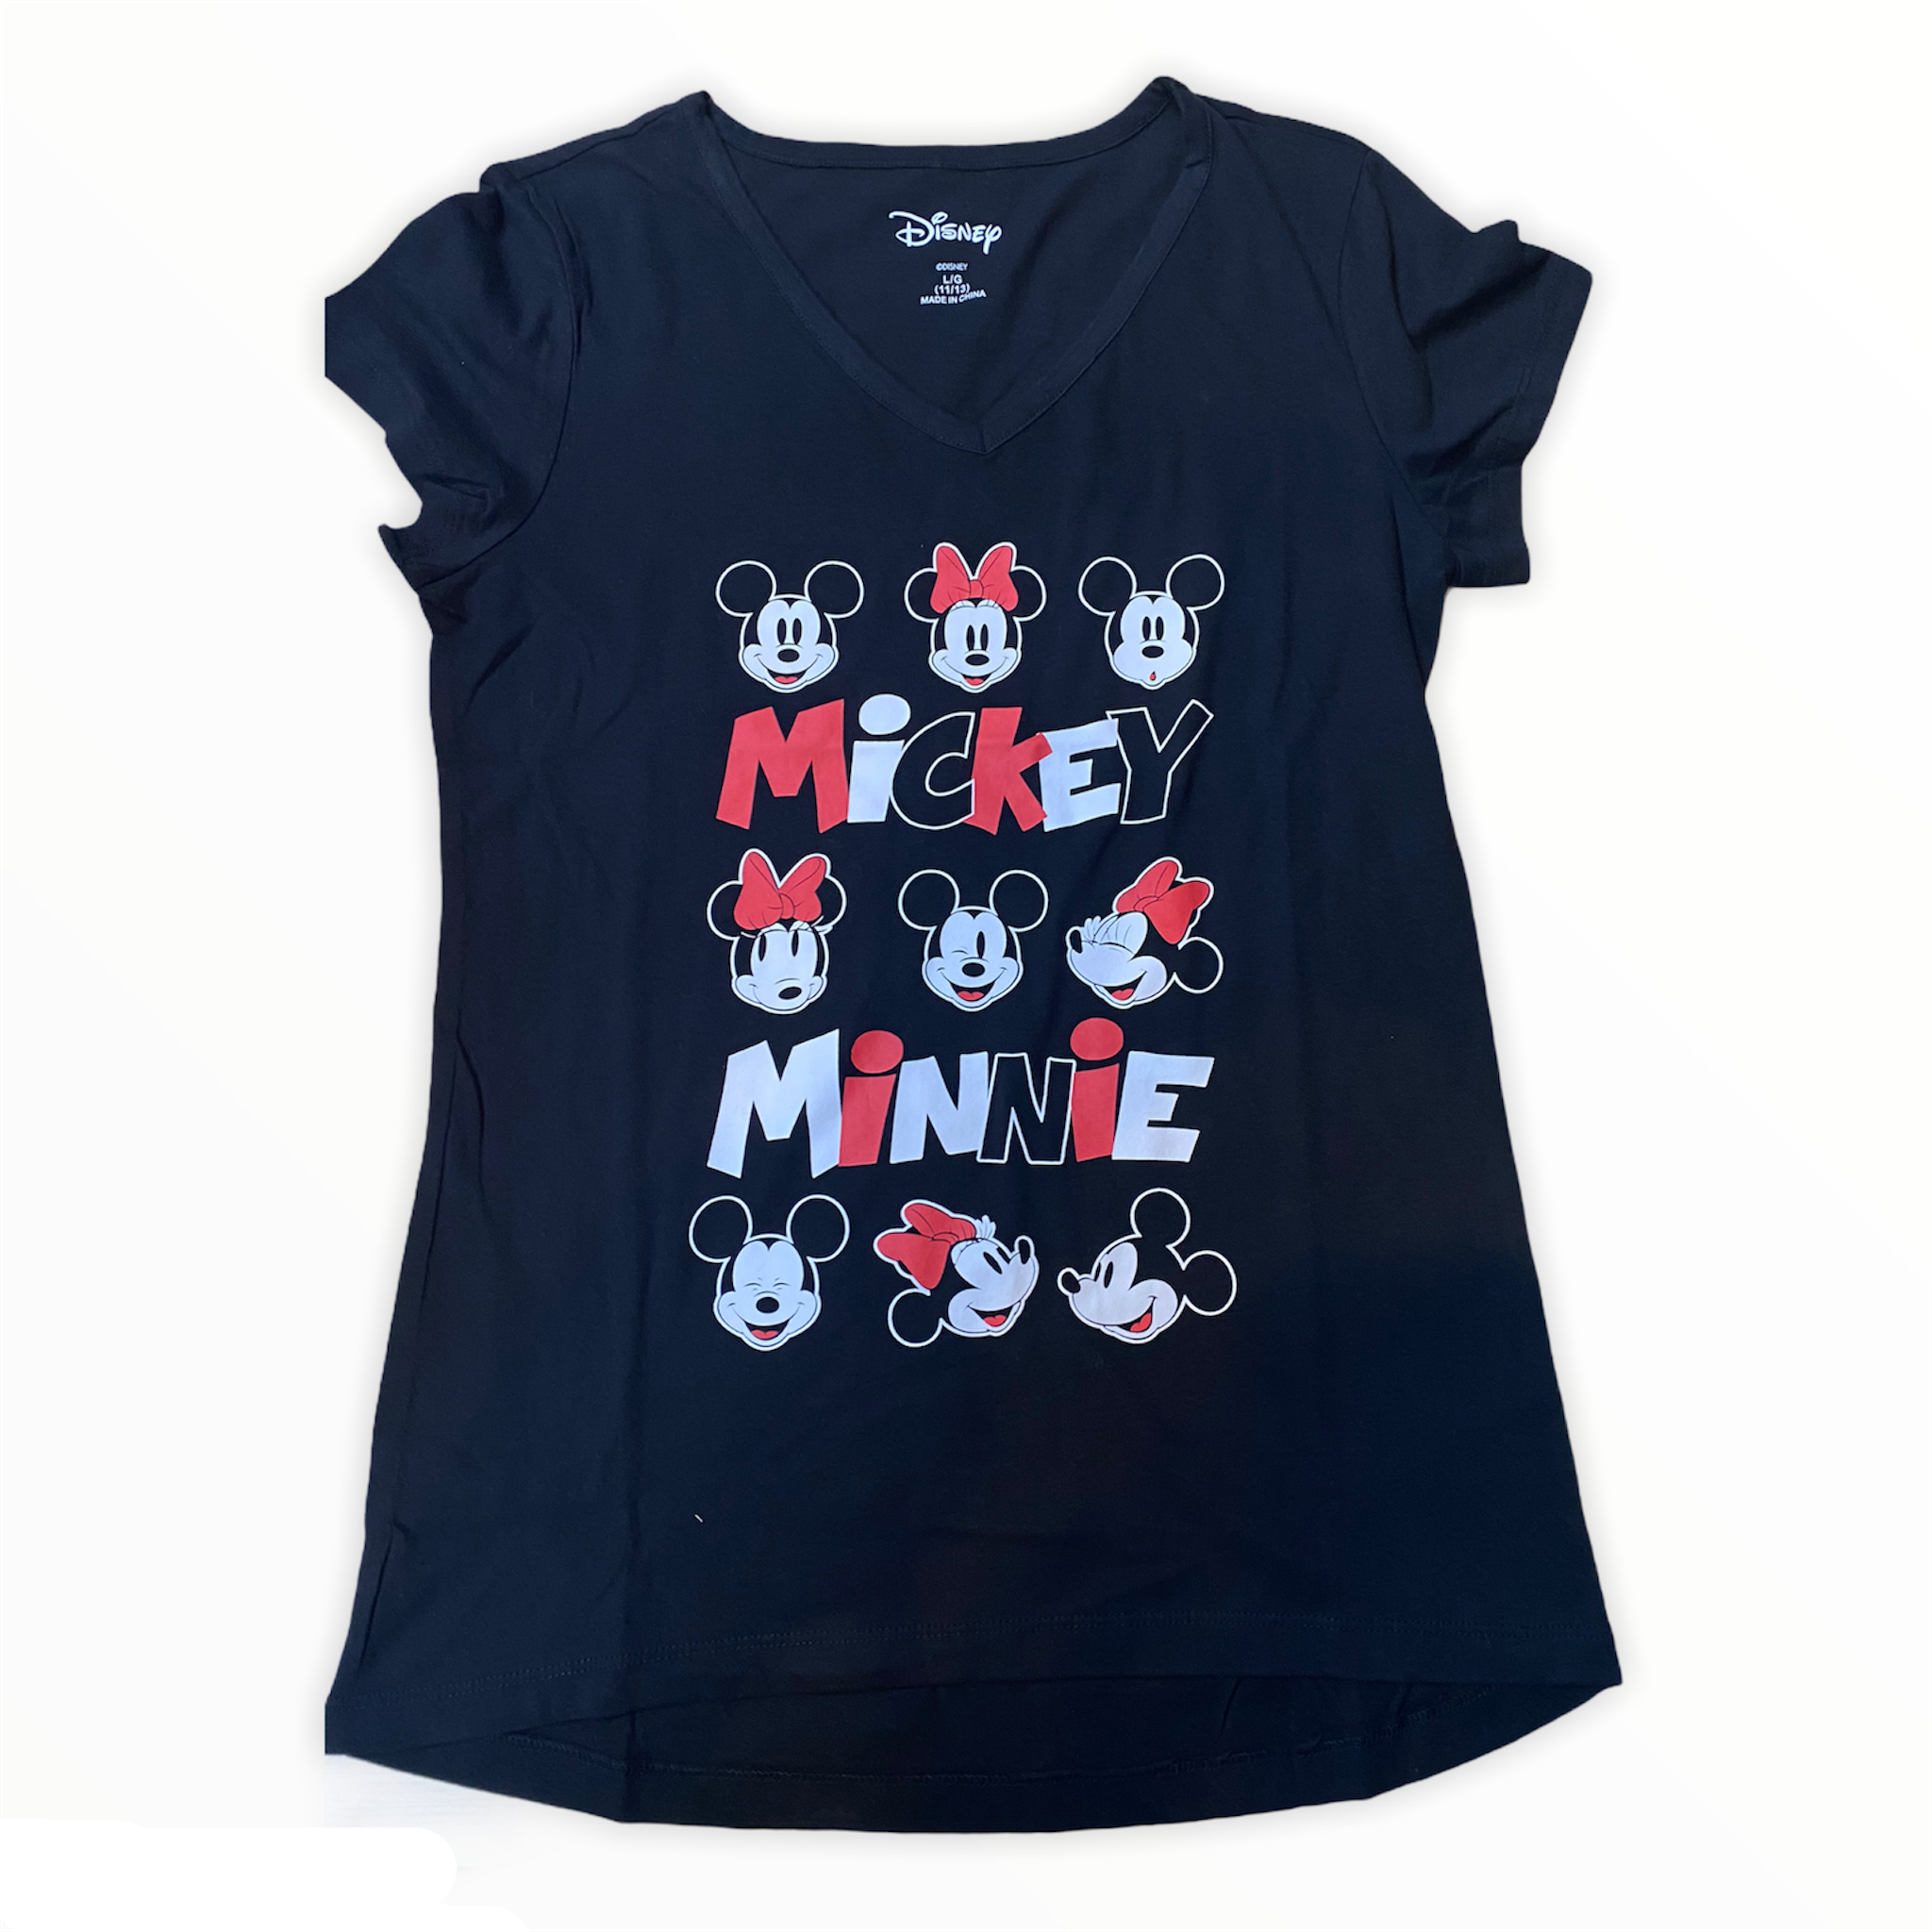 Black Mickey and Minnie Faces Women's Top